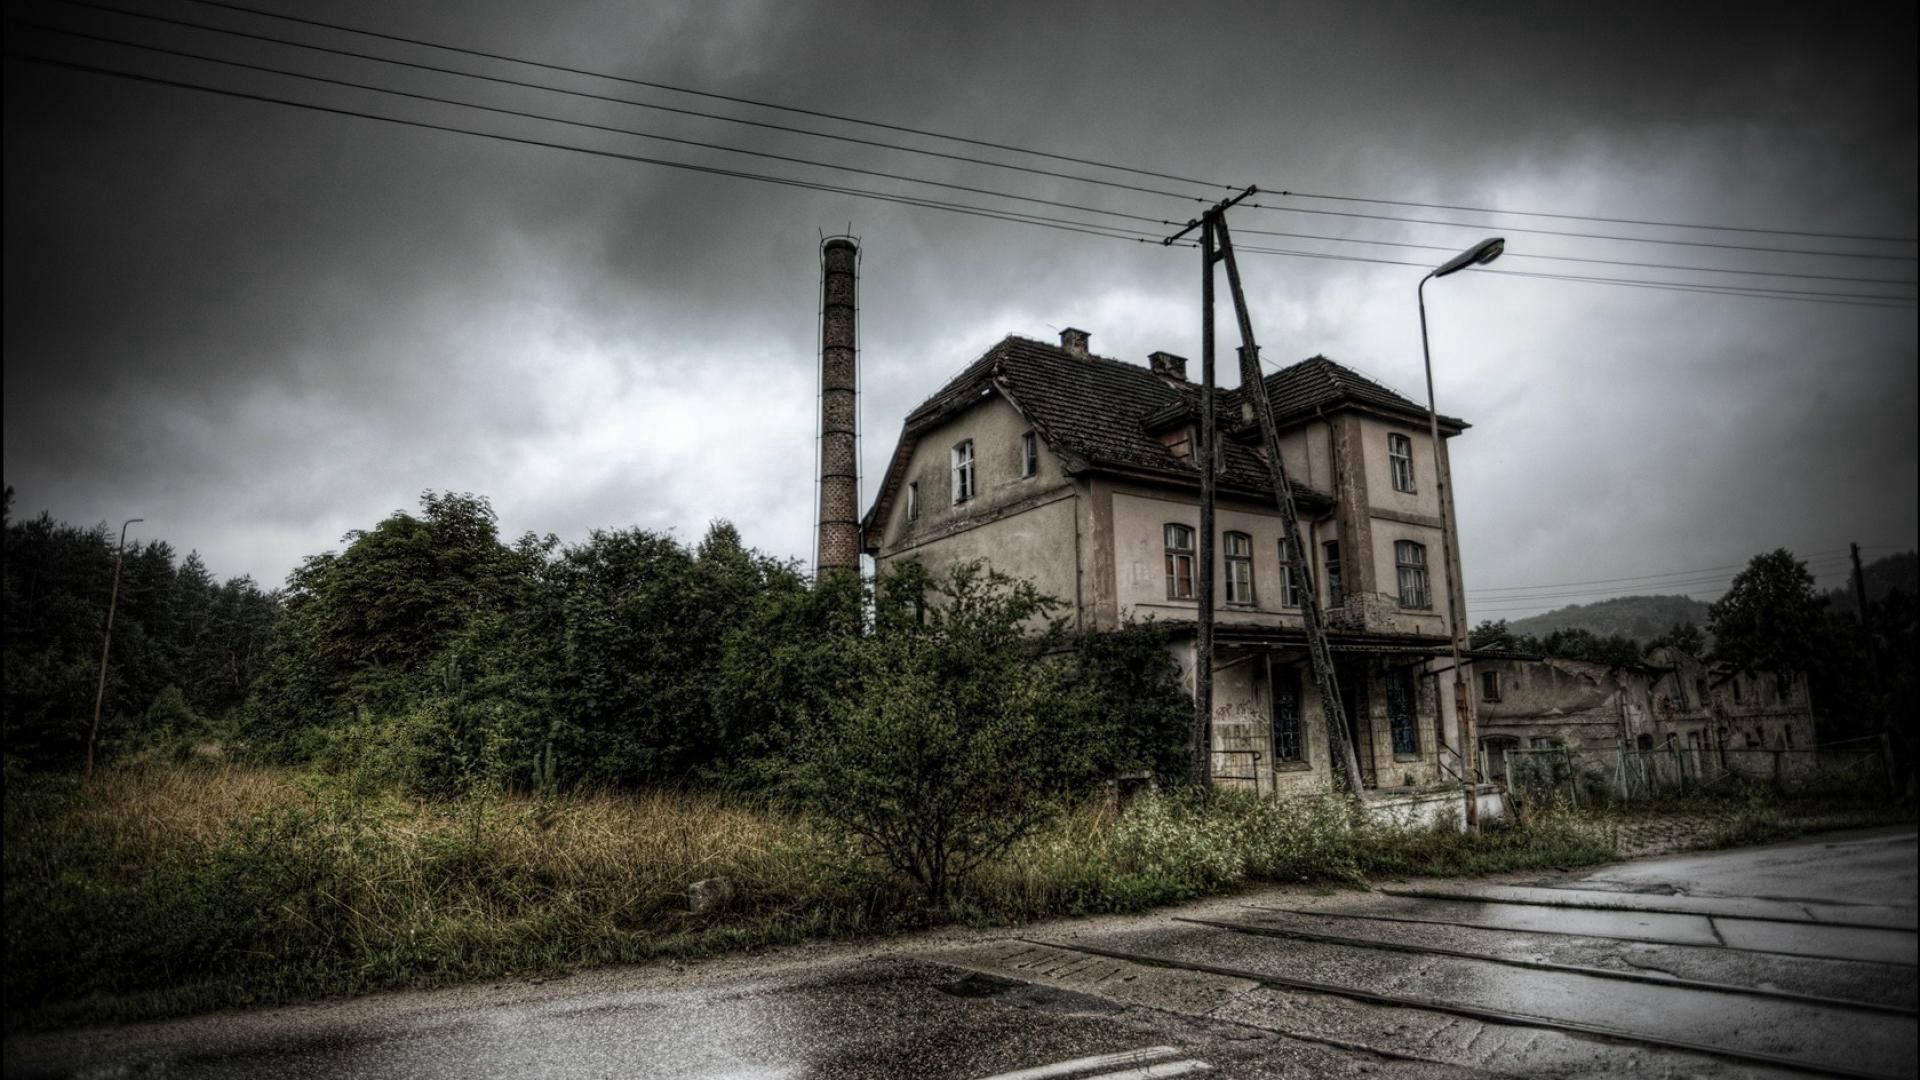 Download wallpaper 1920x1080 building, abandoned, grass, overcast